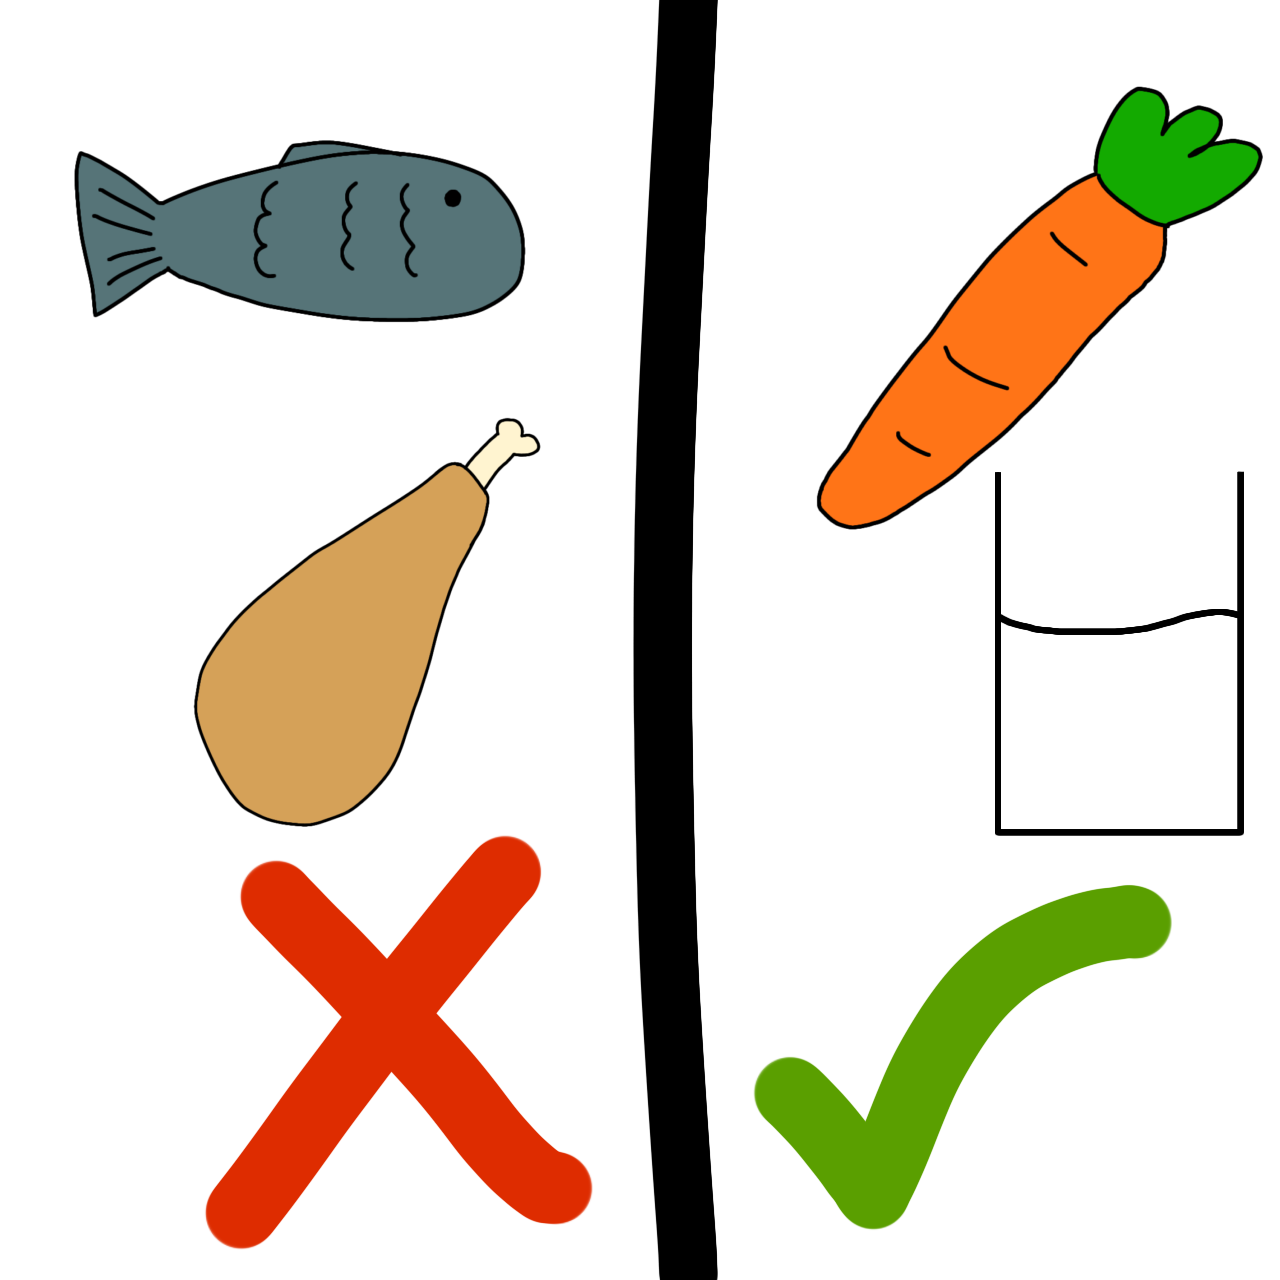 image is split in half. On one side is fish, and chicken leg, with a red X. On the other side is a carrot, and glass of milk with green tick.